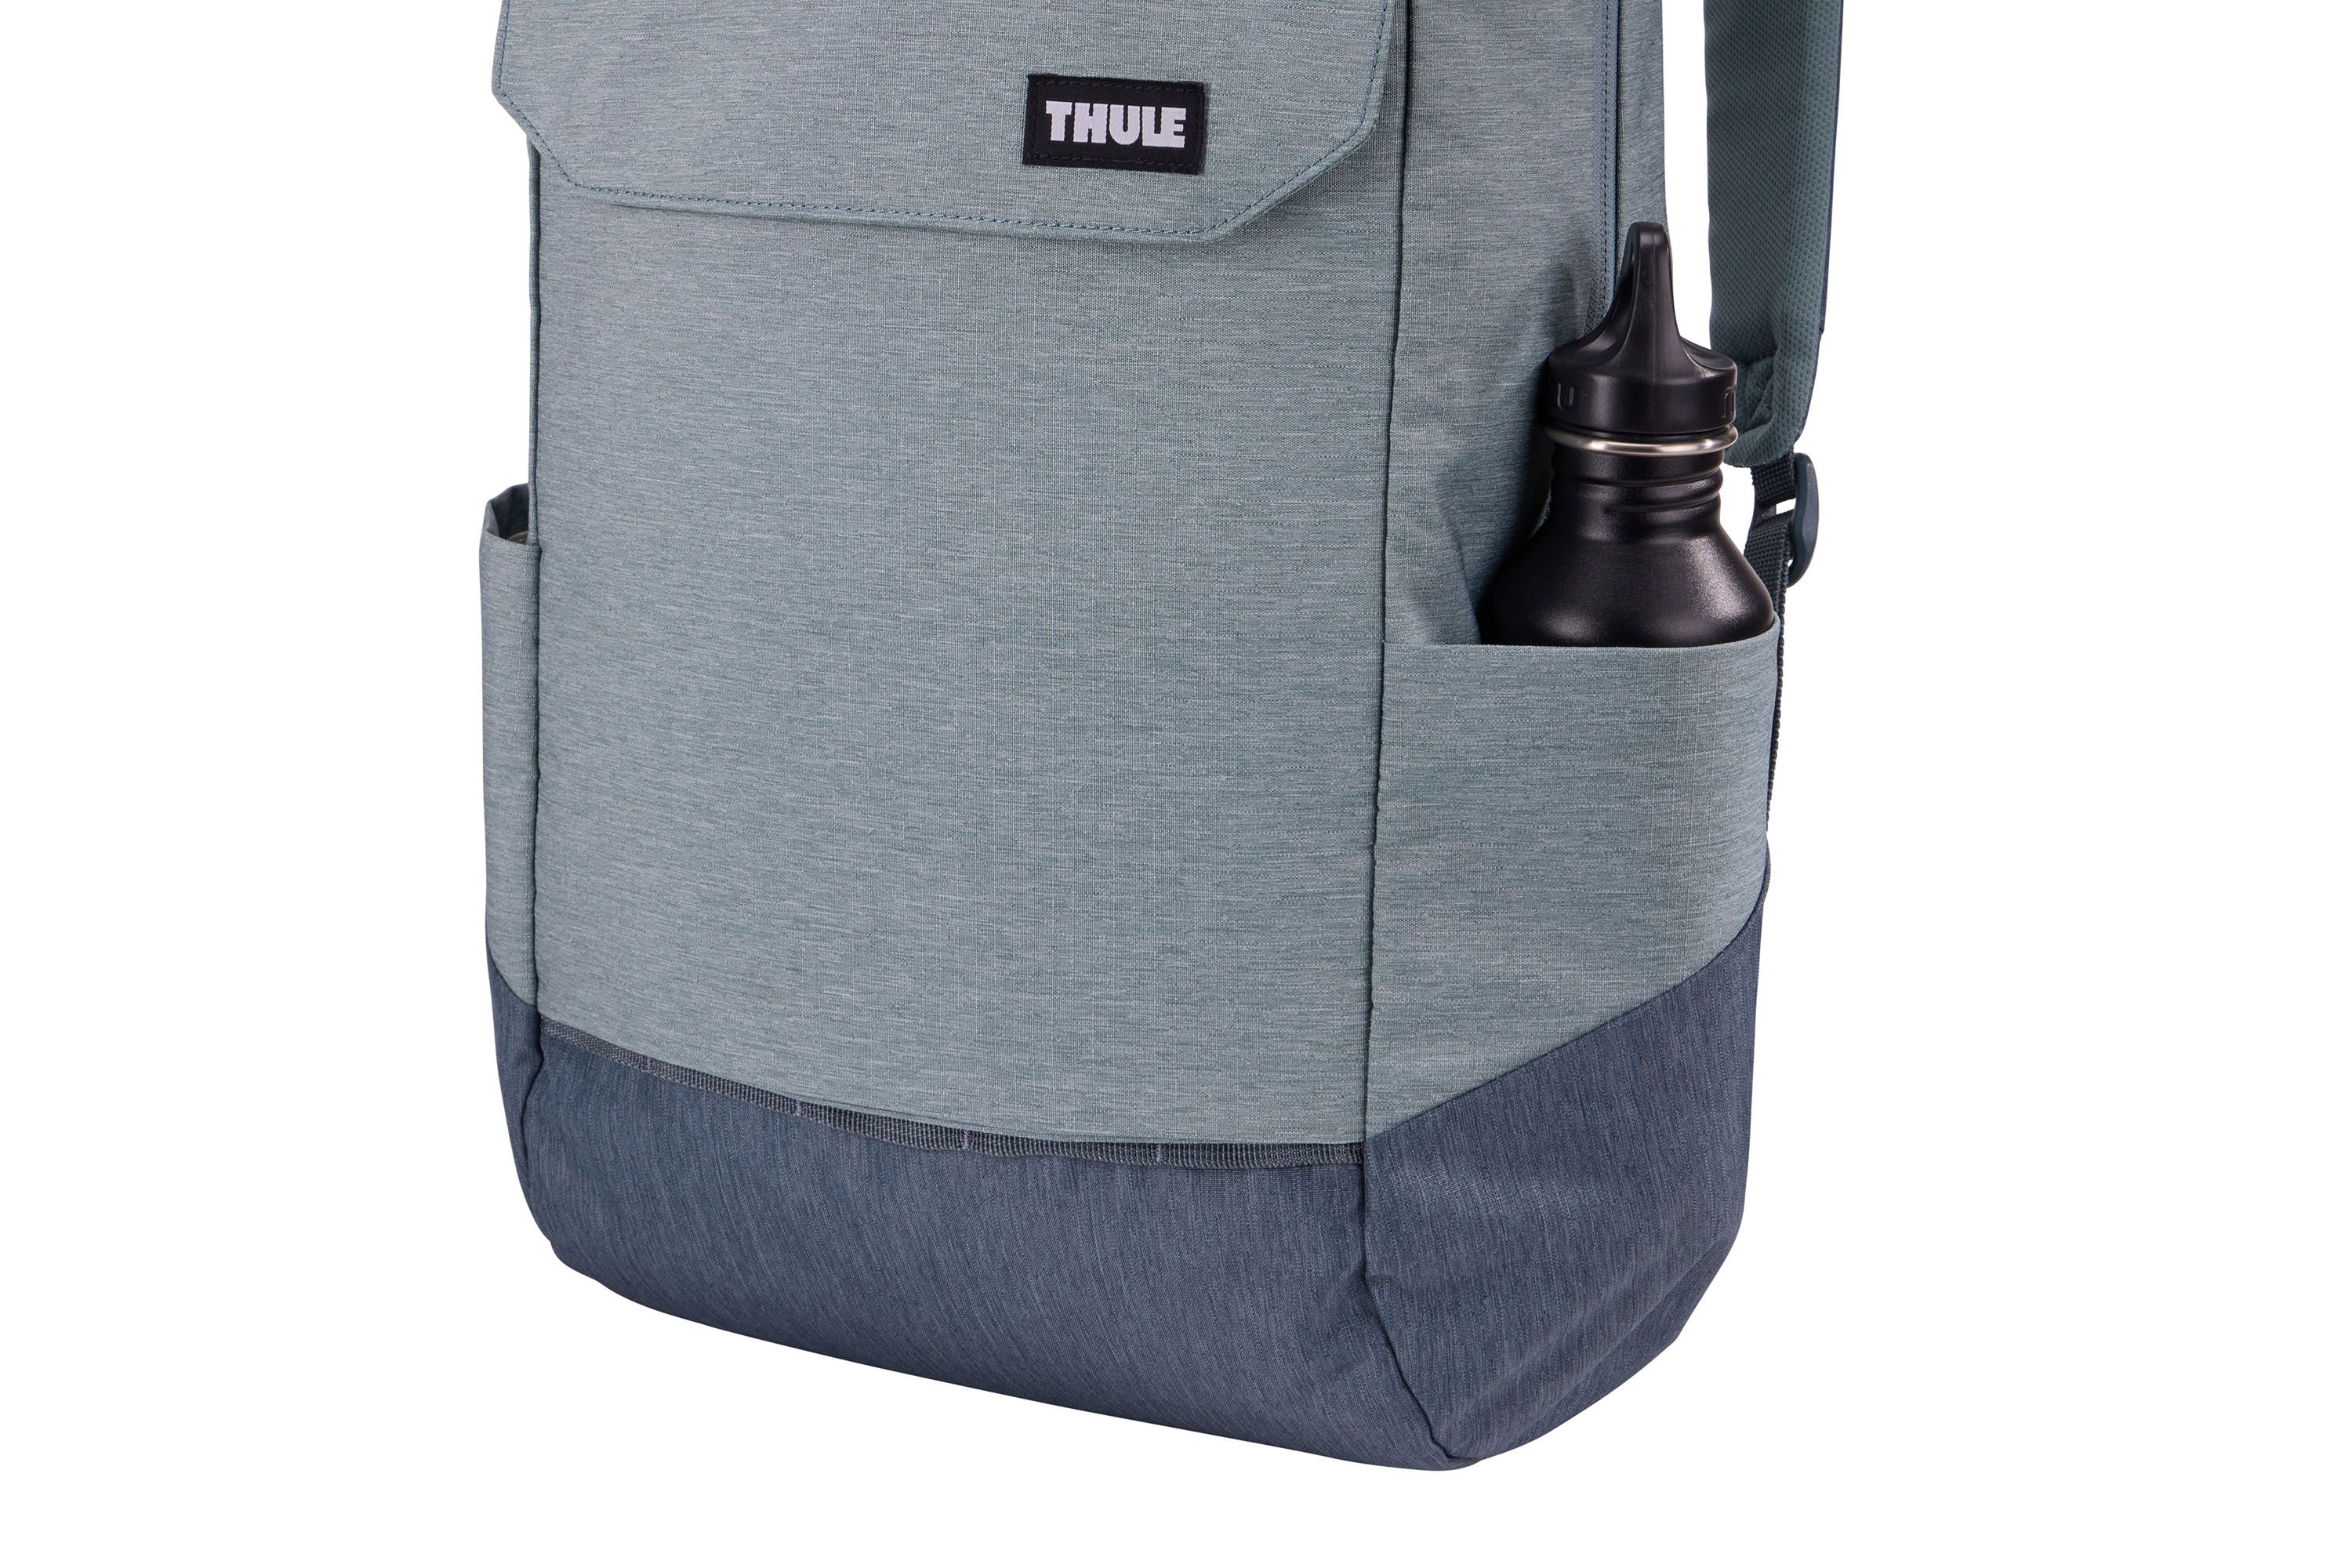 Thule Lithos 20L Backpack 3204836 B&H Photo Video